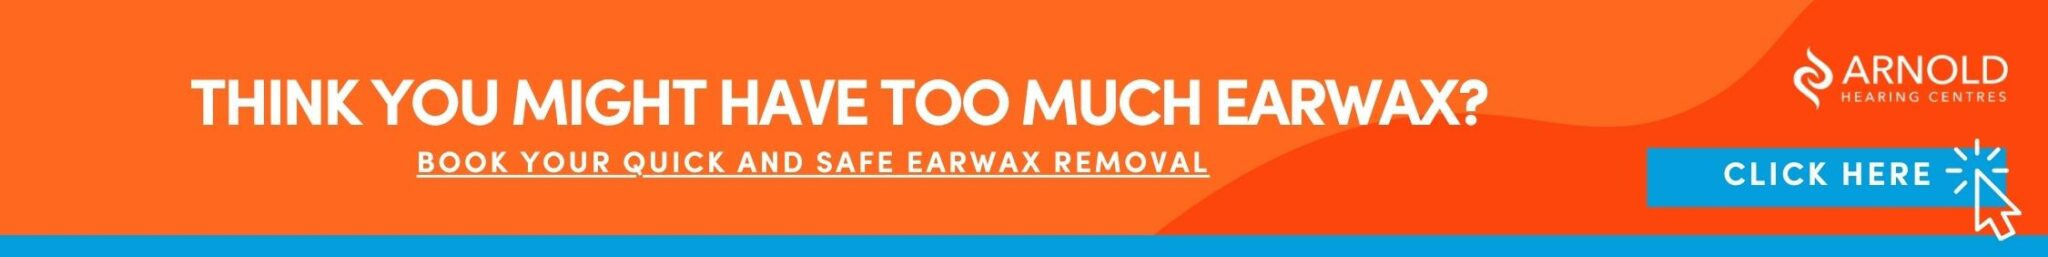 Think You Might Have Too Much Earwax? Book Your quick and Safe Earwax Removal